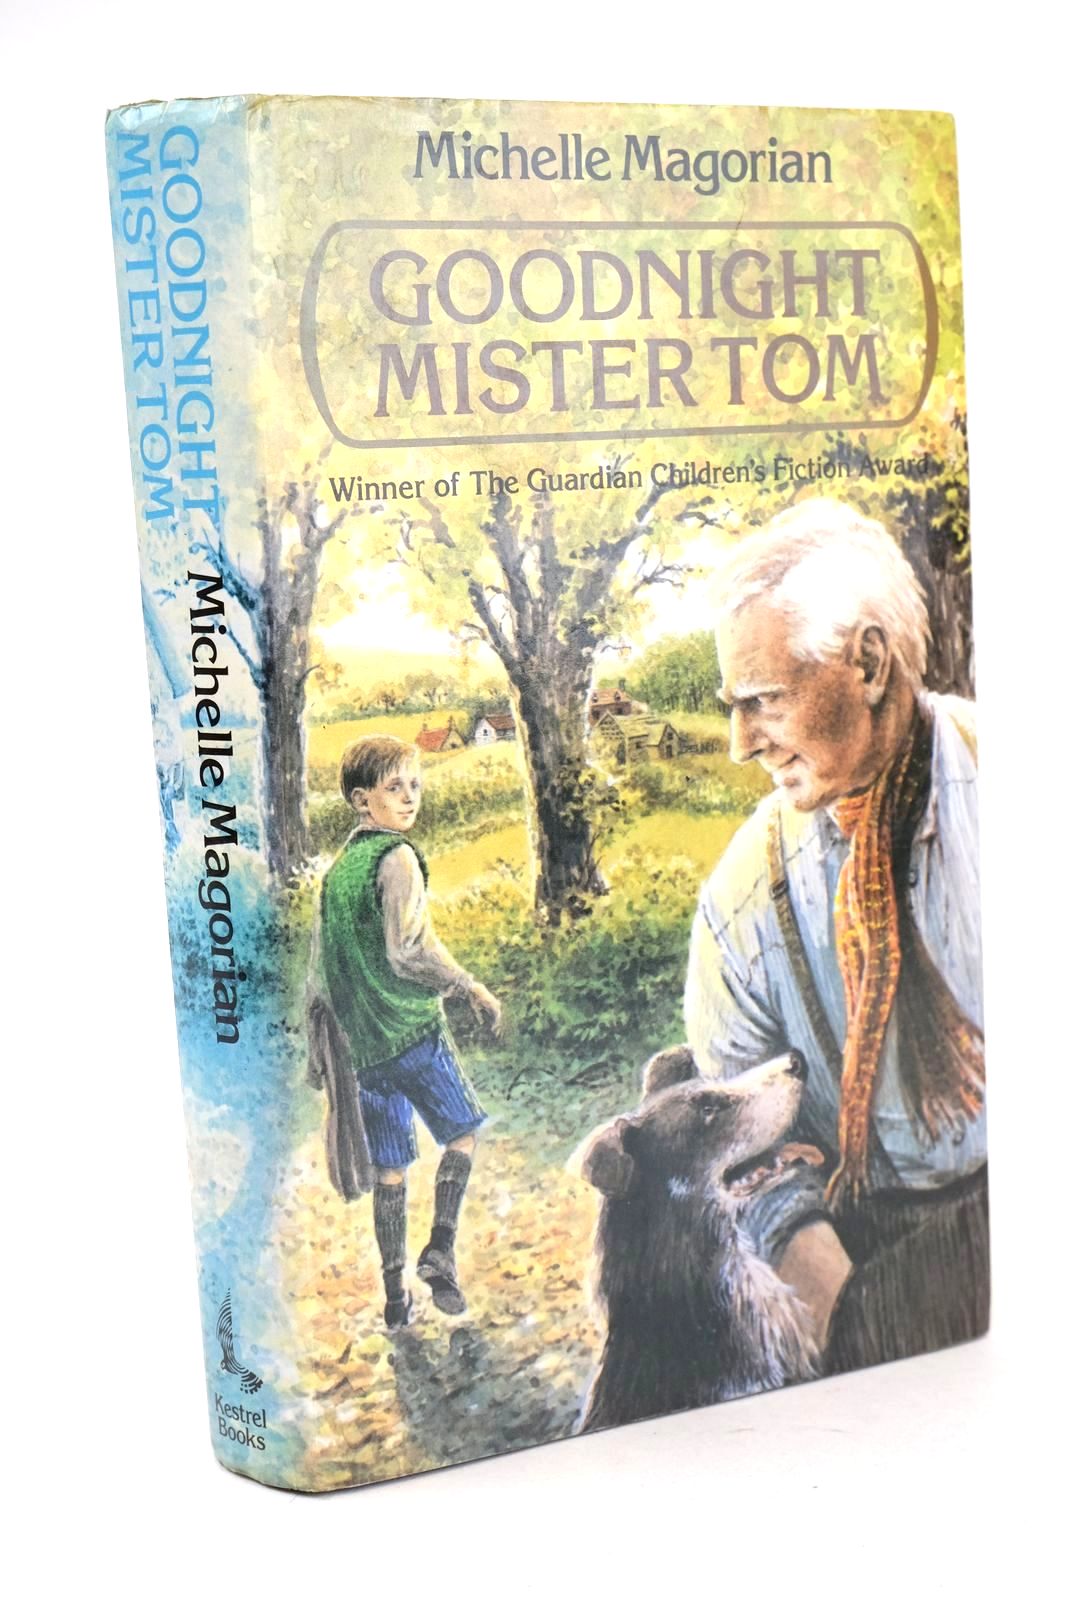 Photo of GOODNIGHT MISTER TOM written by Magorian, Michelle published by Kestrel Books, Penguin Books Ltd (STOCK CODE: 1326074)  for sale by Stella & Rose's Books